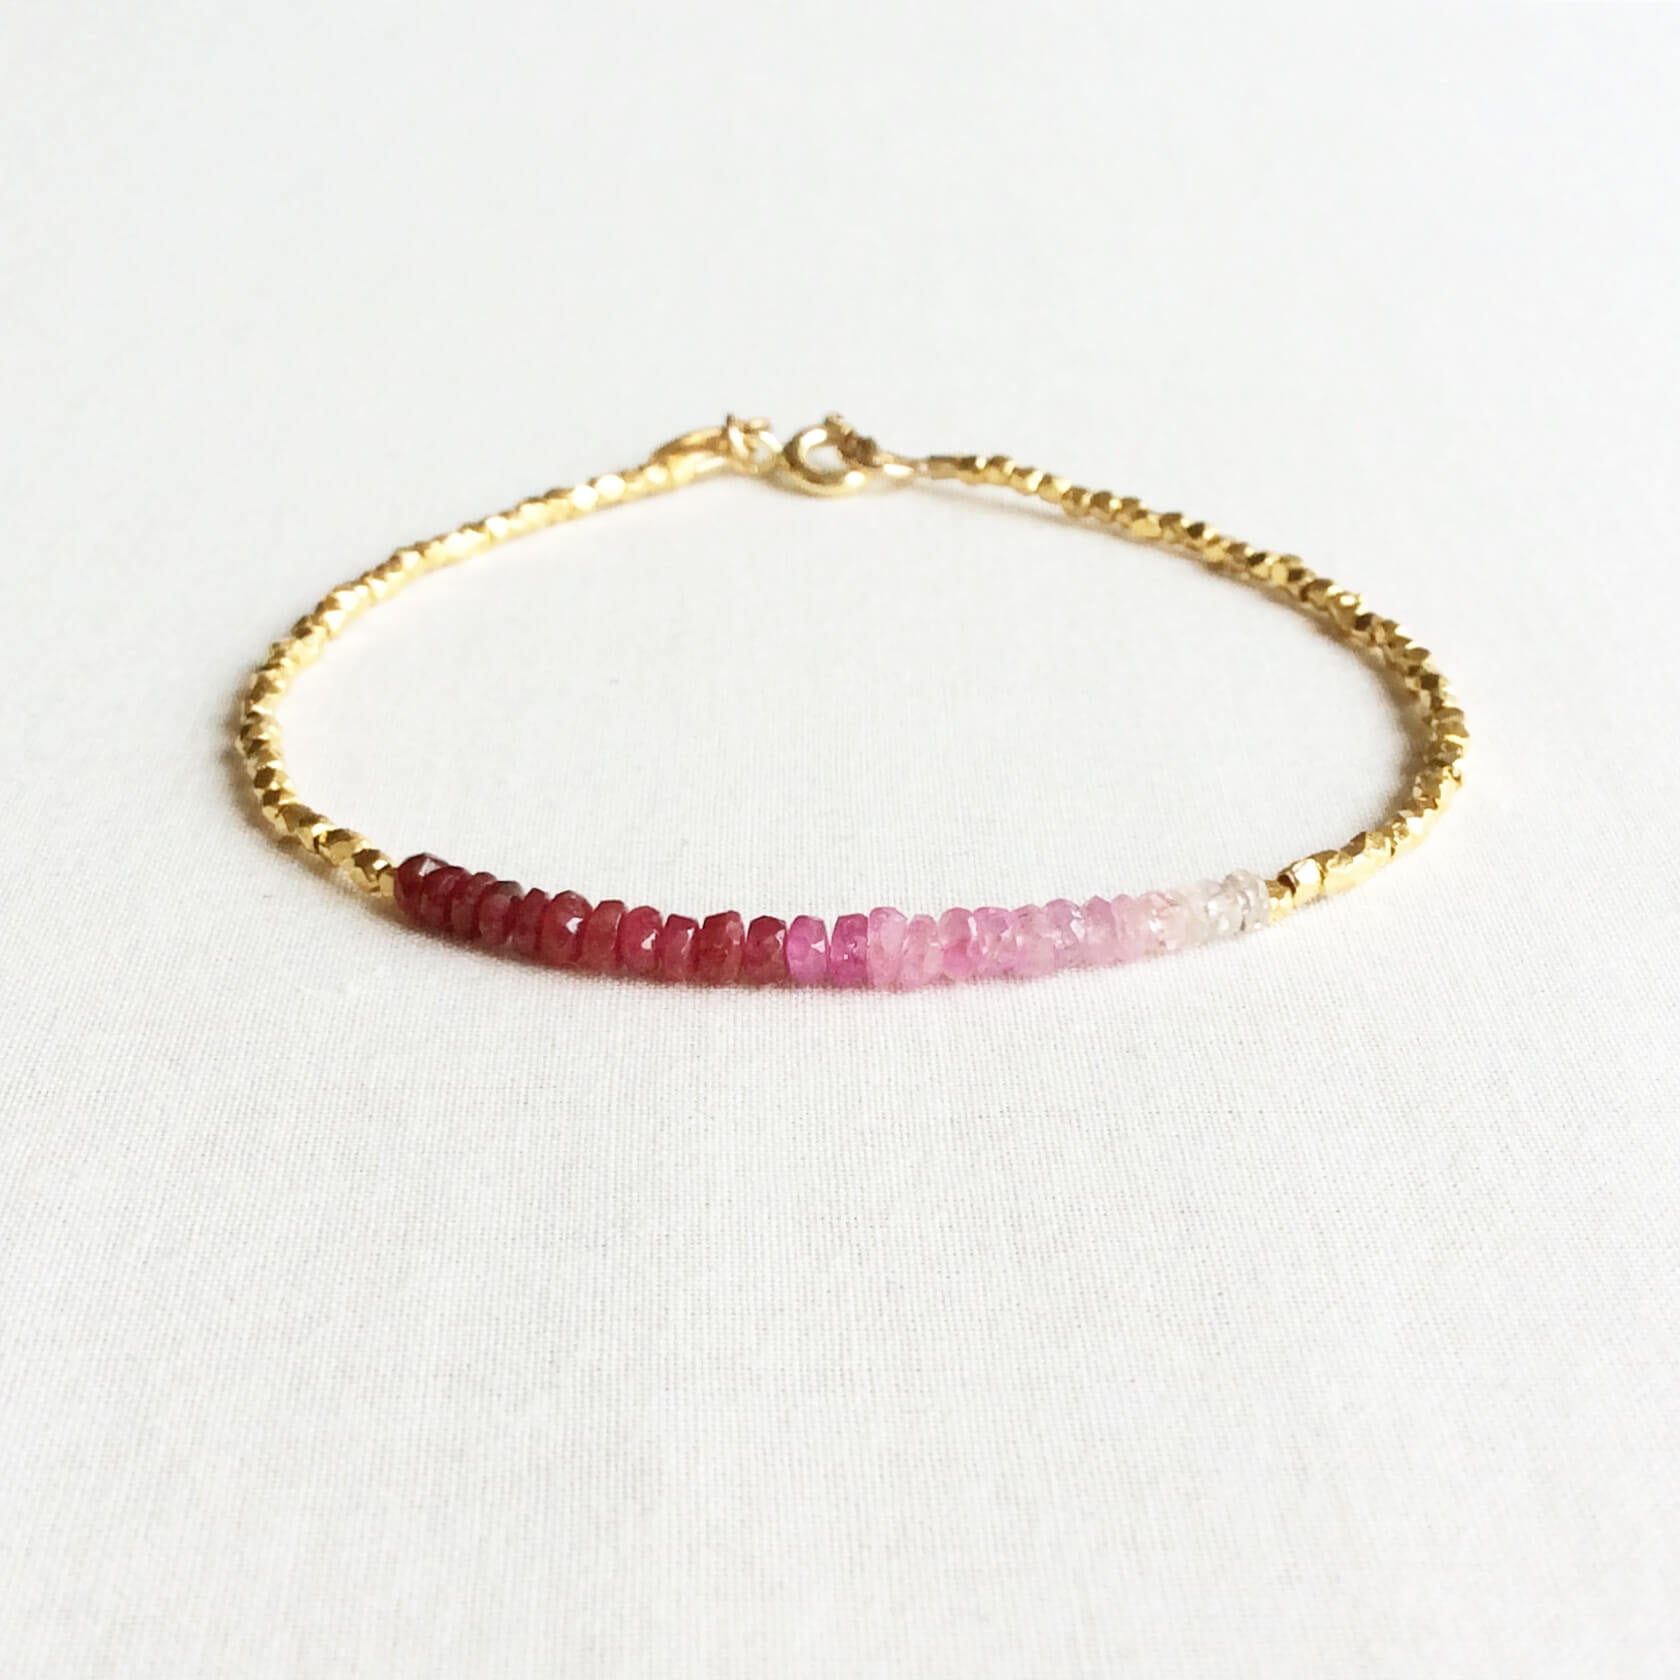 The ombre ruby bracelet is made with hand-selected rubies that have different shades of red – from nearly white to the deepest red. 